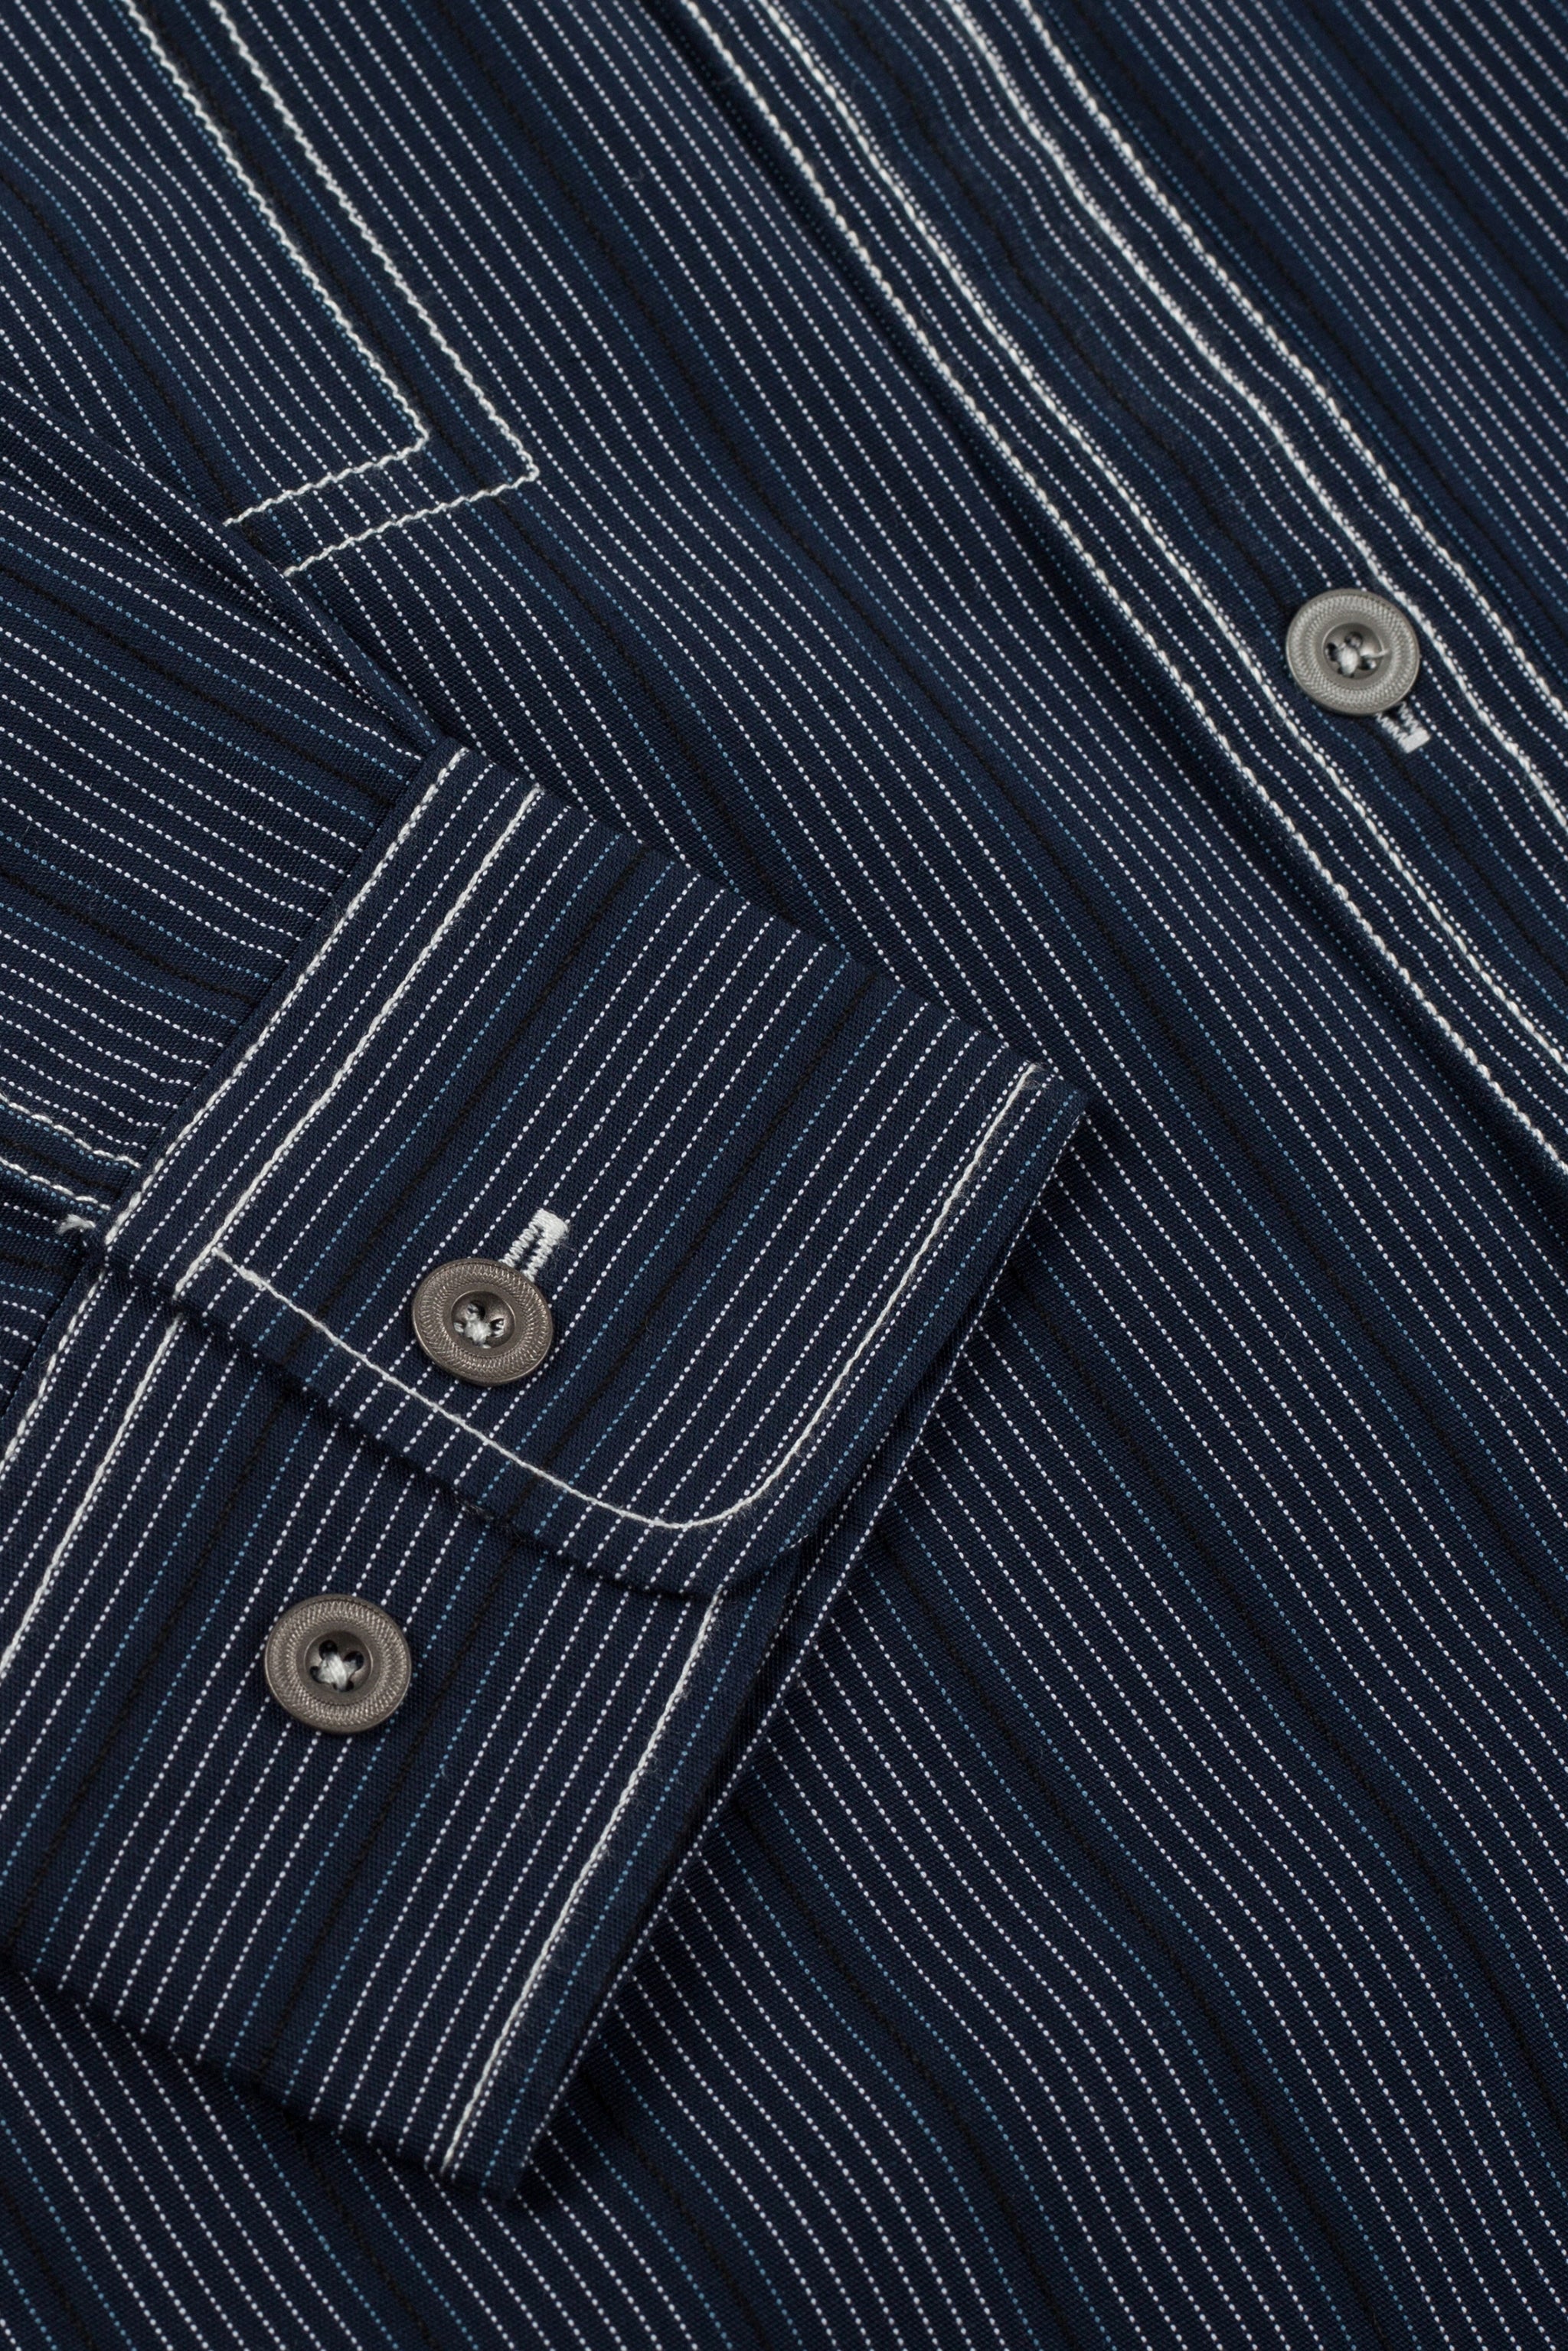 a close up of a blue and white striped shirt